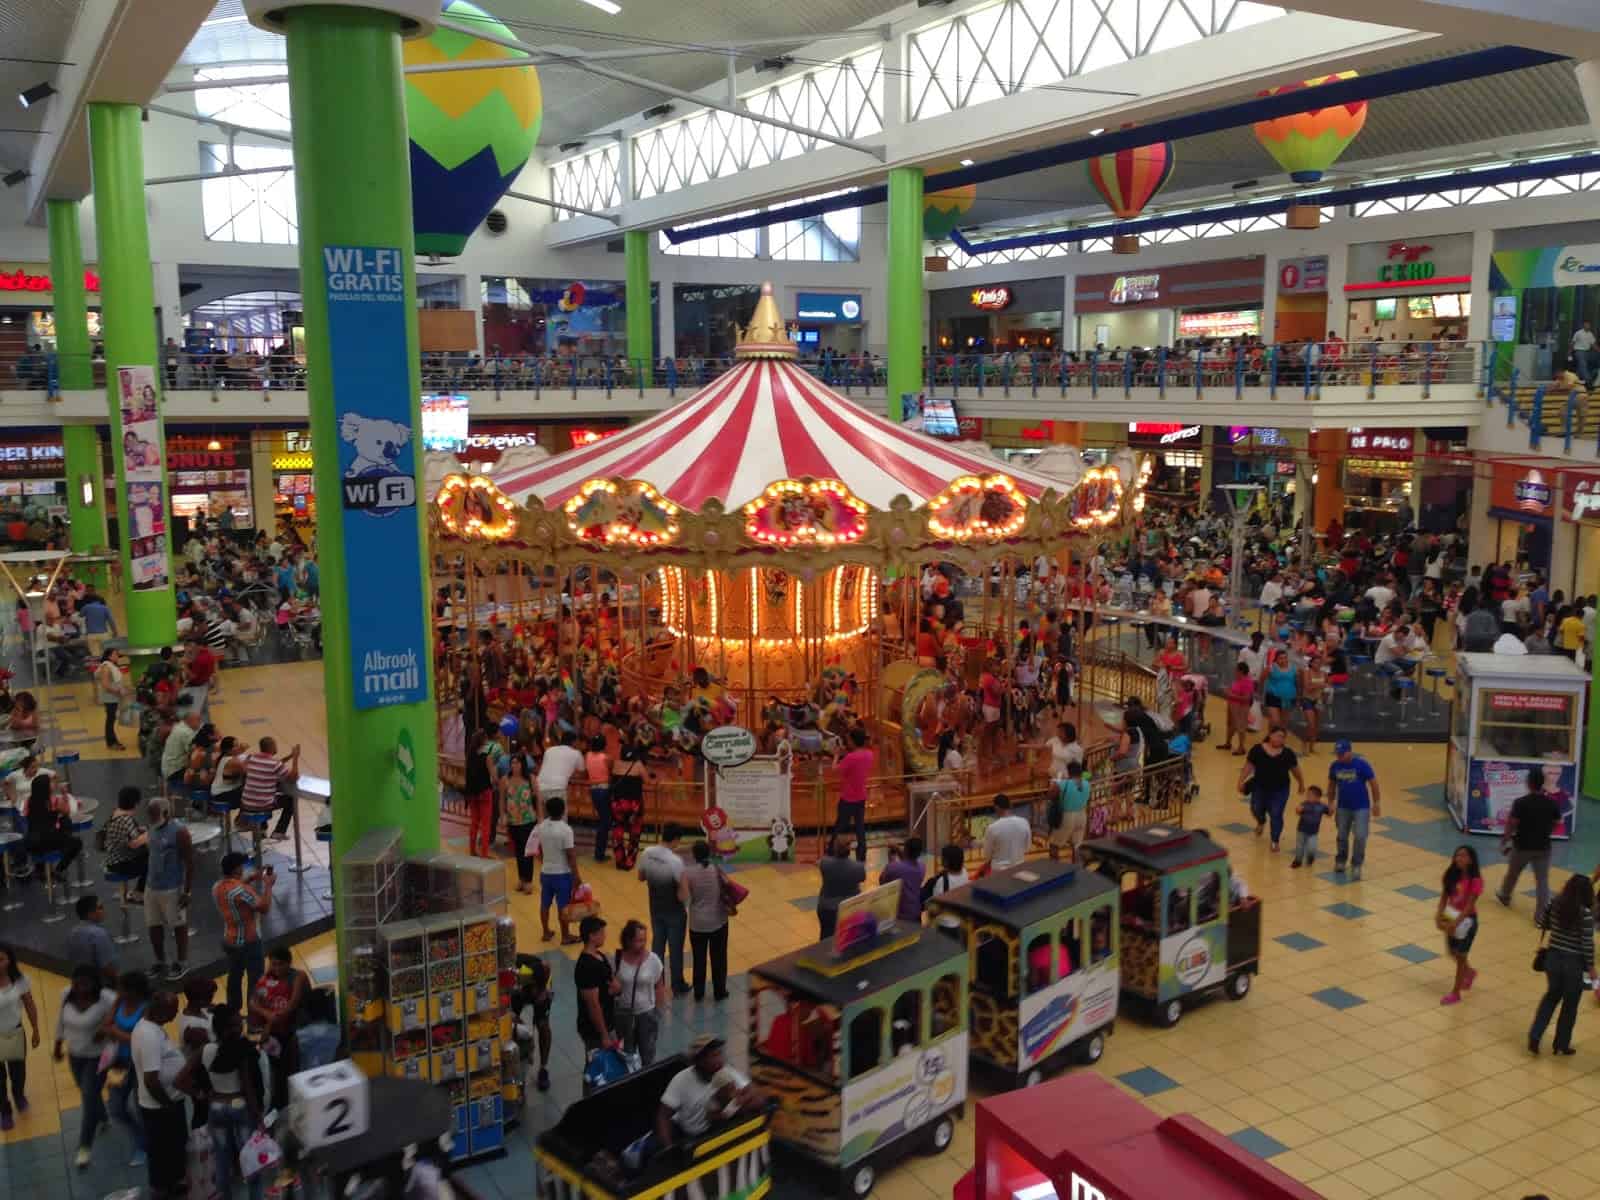 Albrook Mall in Panama City